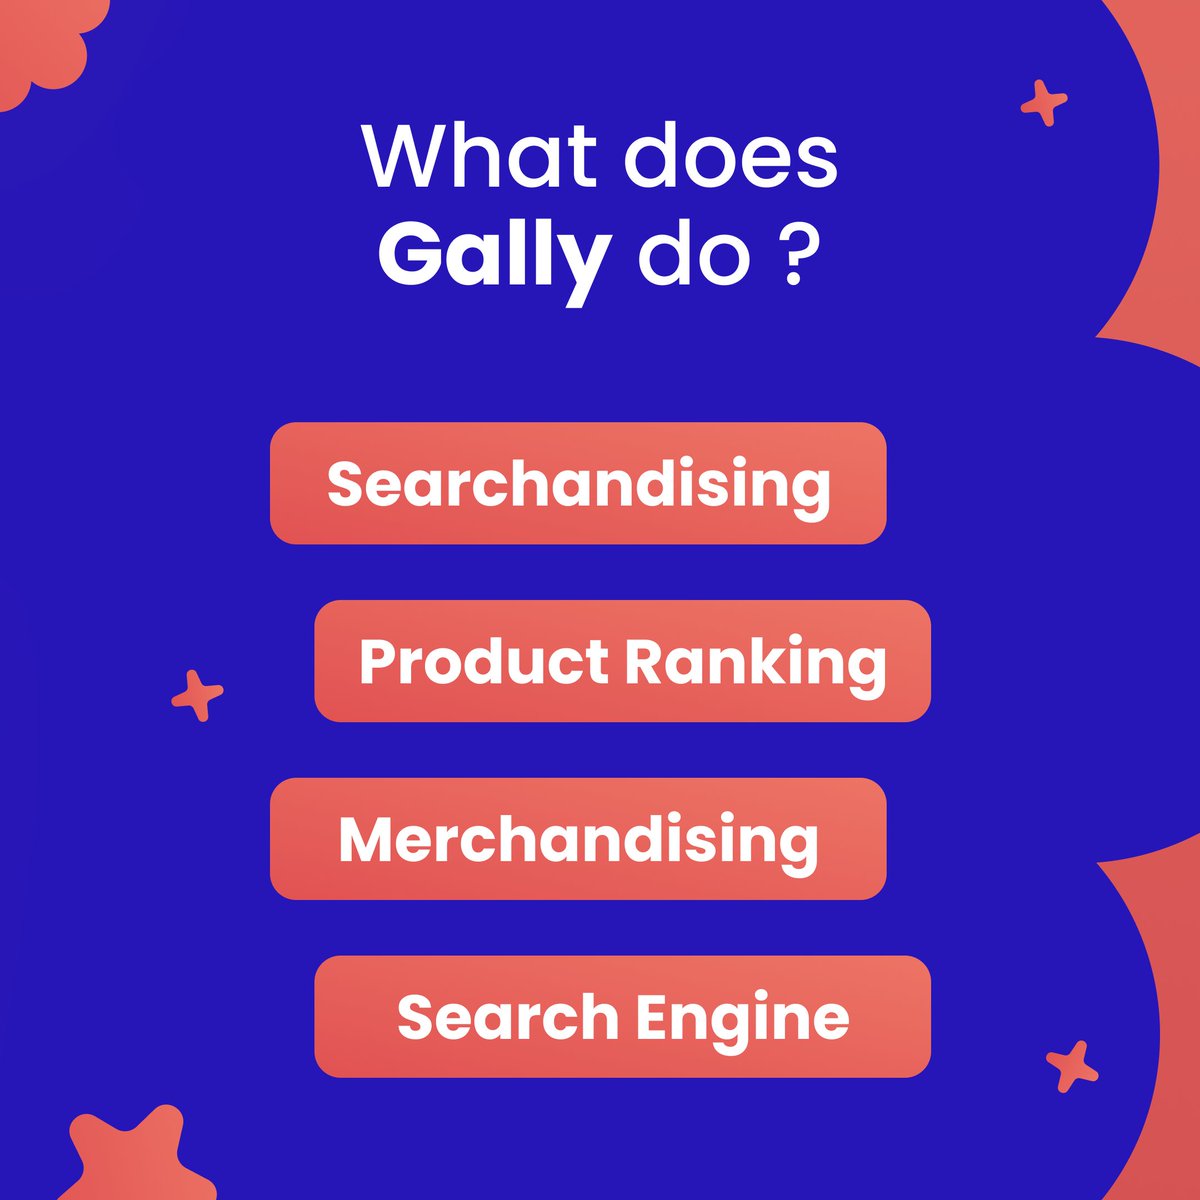 Gally is on @Shopware! Use it to:
- Optimize #emerchandising, #ecommerce & #SEO
- Boost #conversionrates
- Improve #searchandising
Request a demo: bit.ly/3MggiQq

#Opensource #eretail #ecommercegrowth #shopware